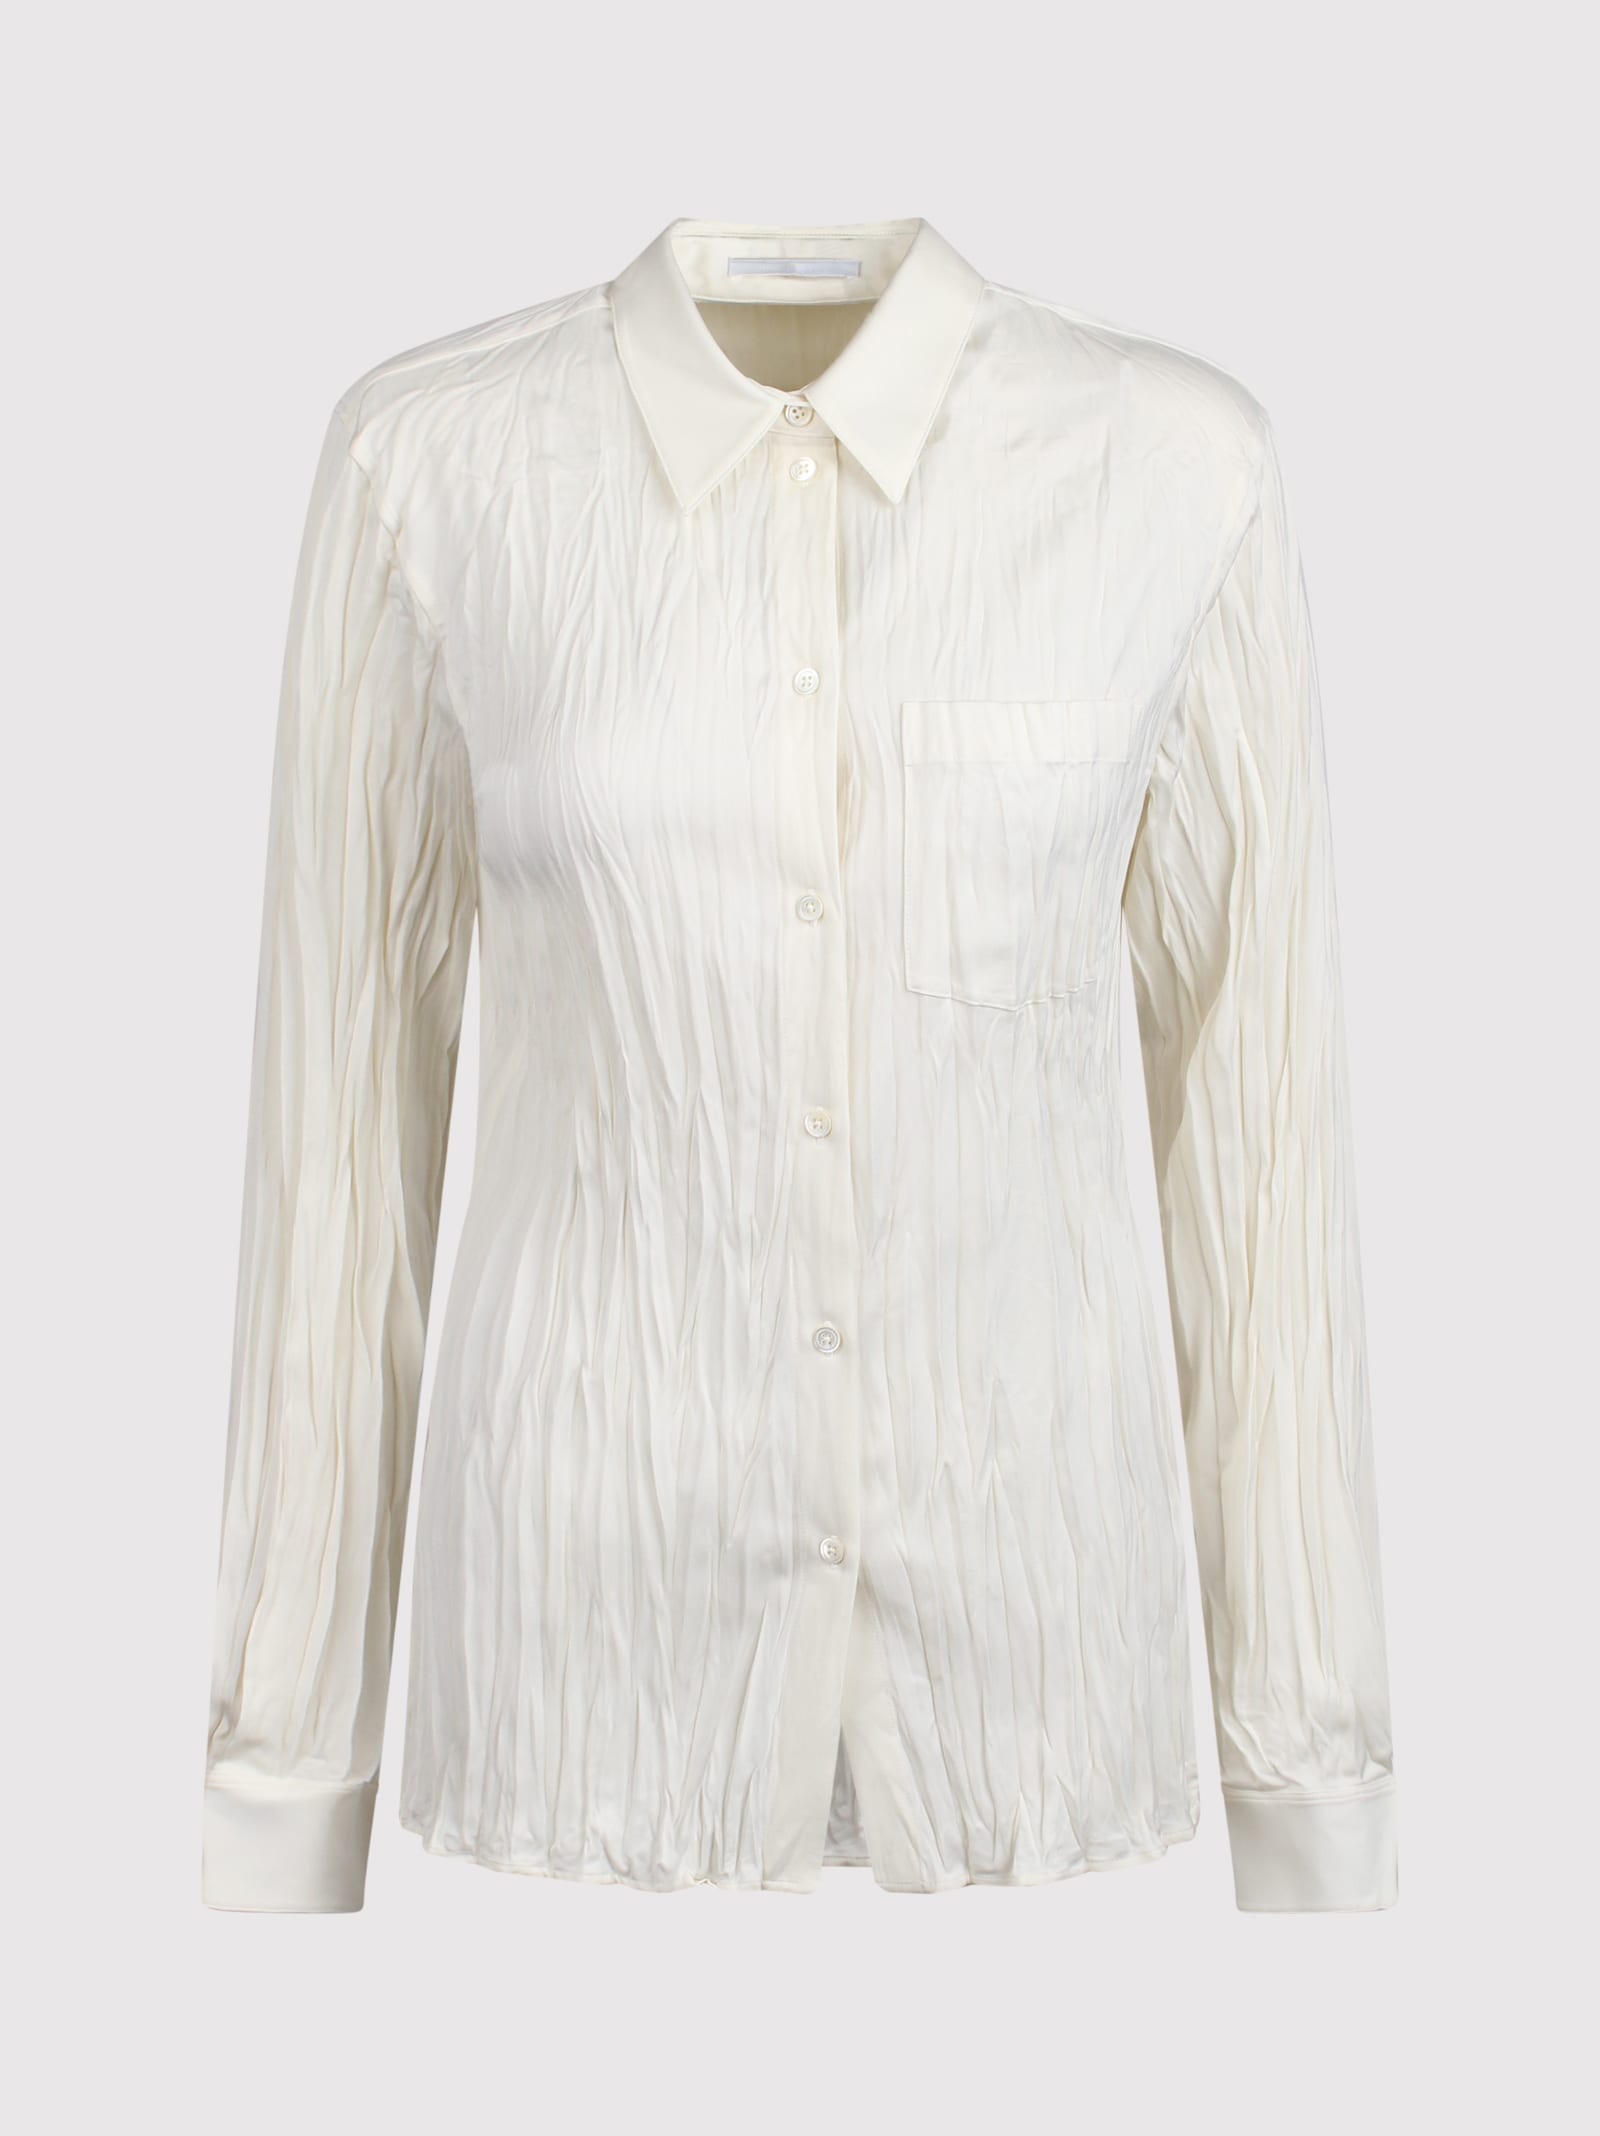 Helmut Lang Classic Wrinkled Effect Shirt In Neutral